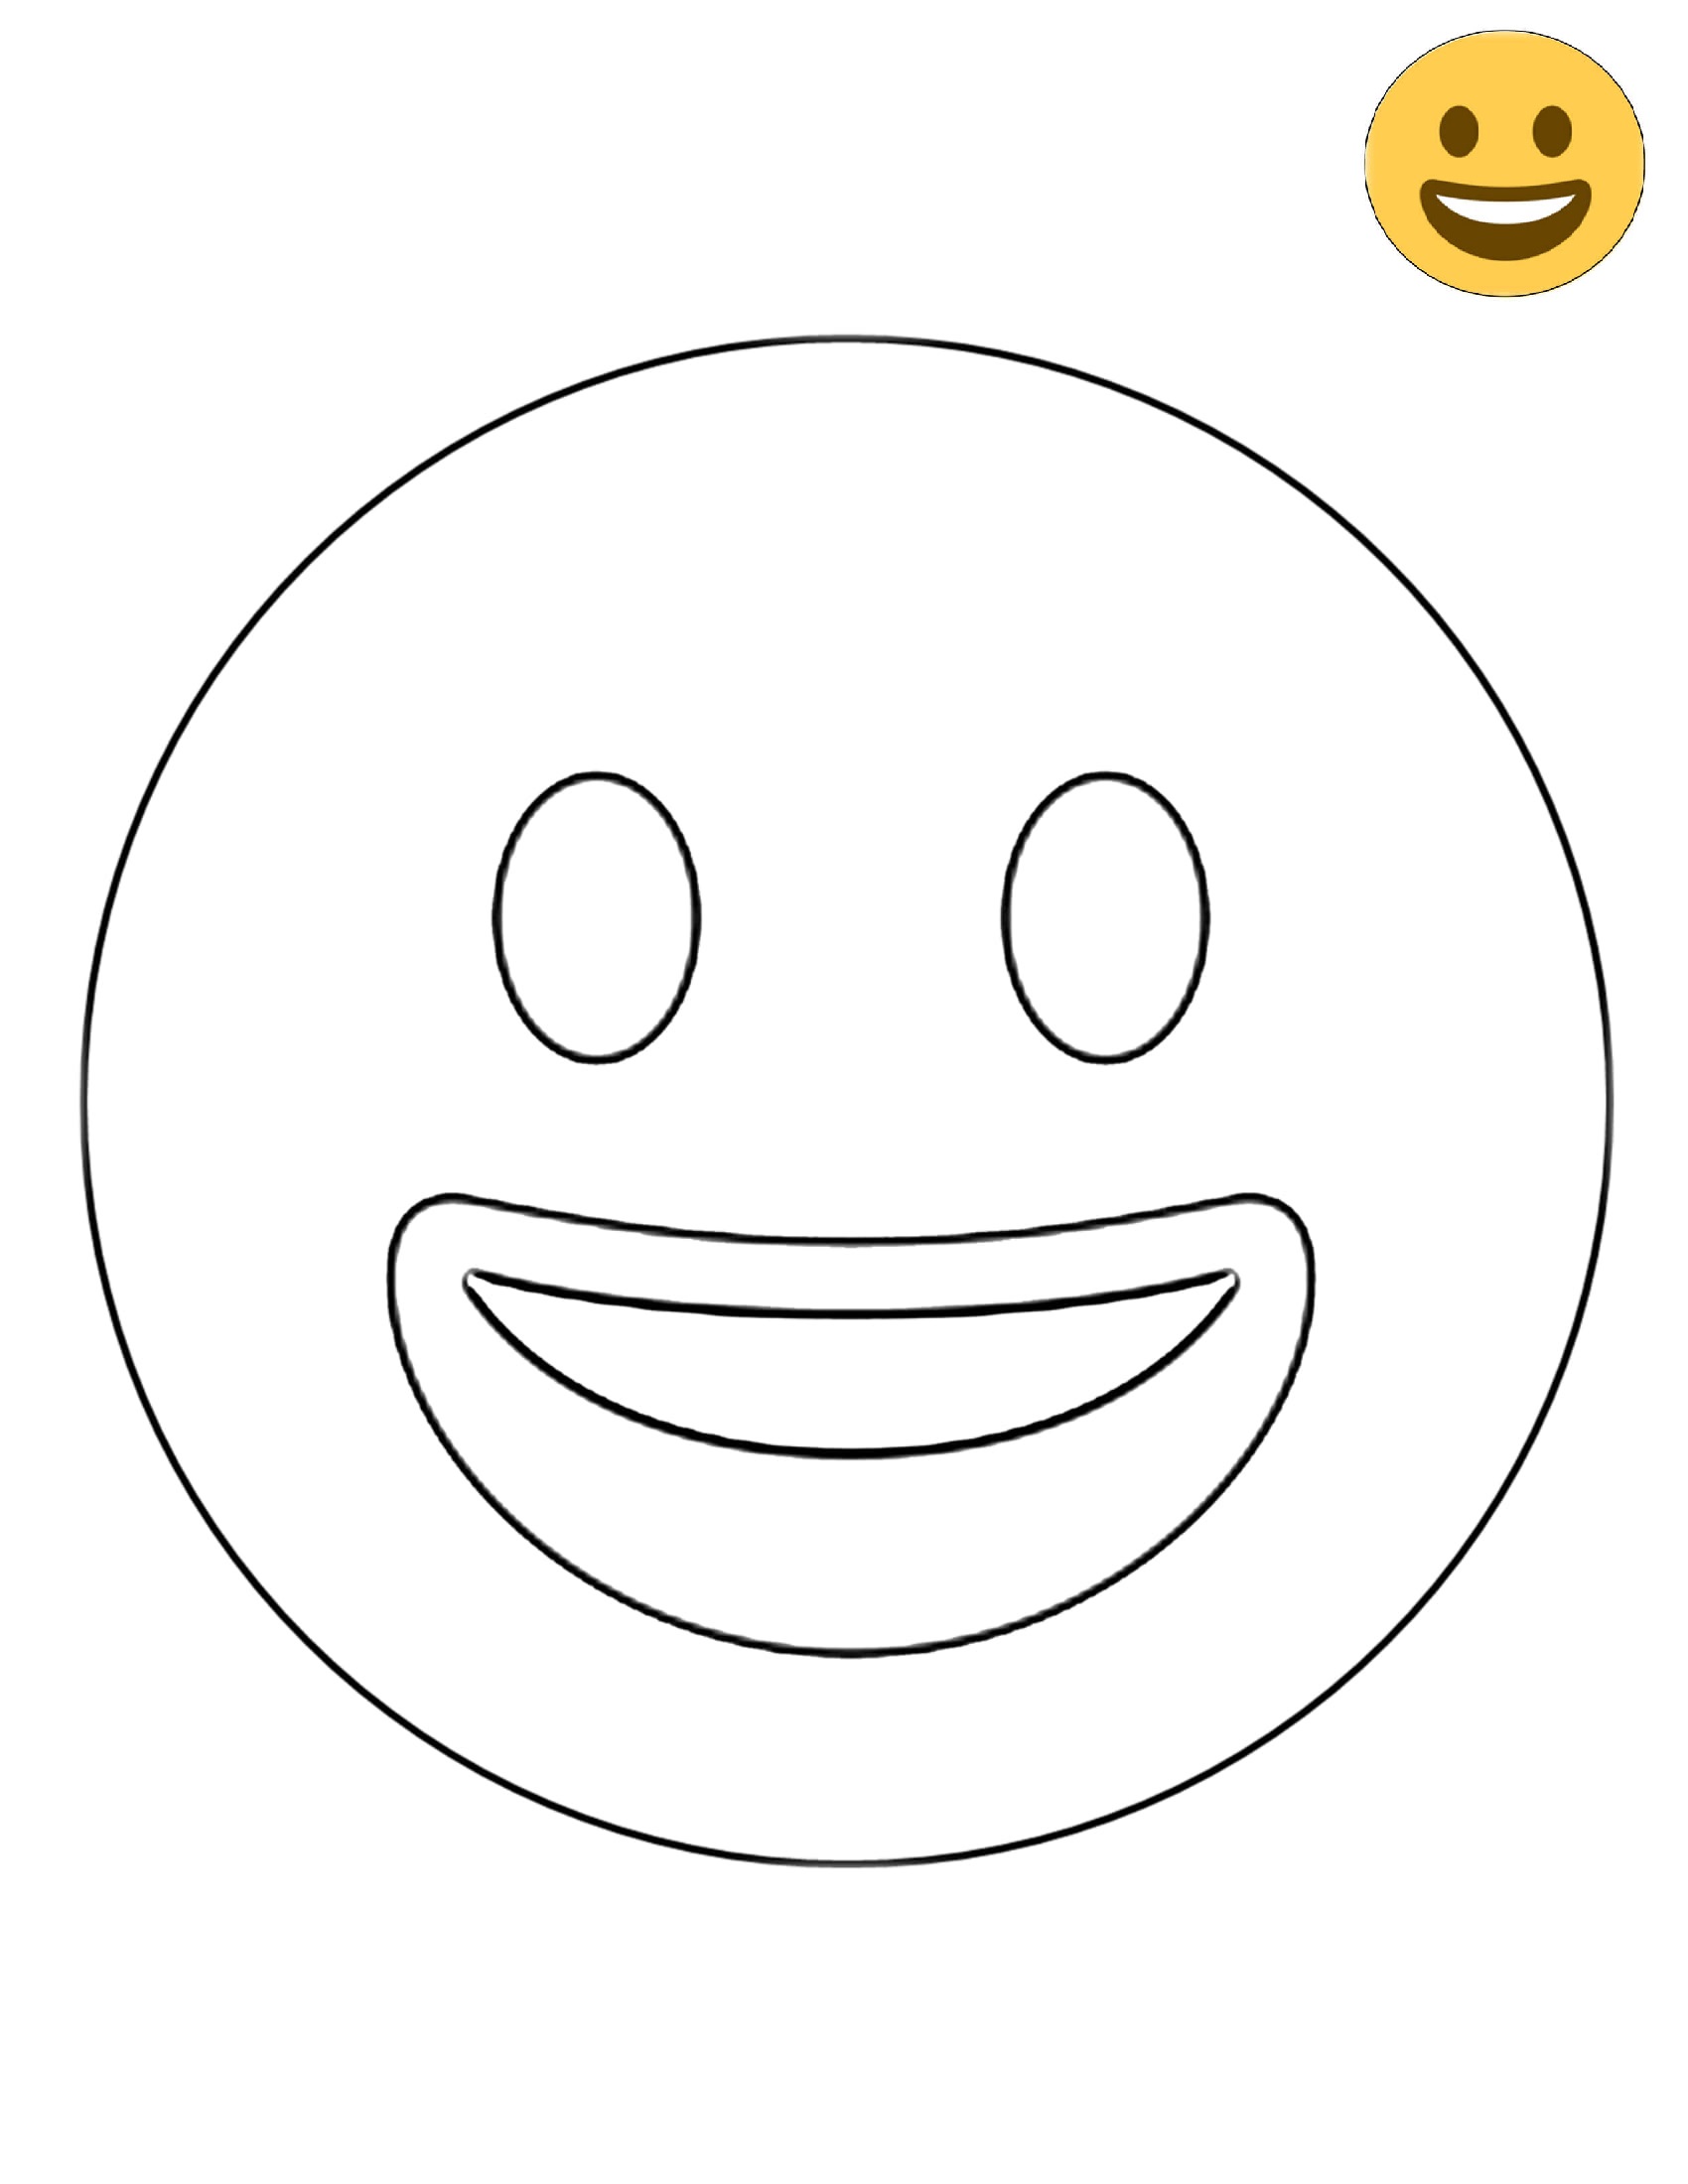 Twitter Smiling Face Emoji Coloring Page